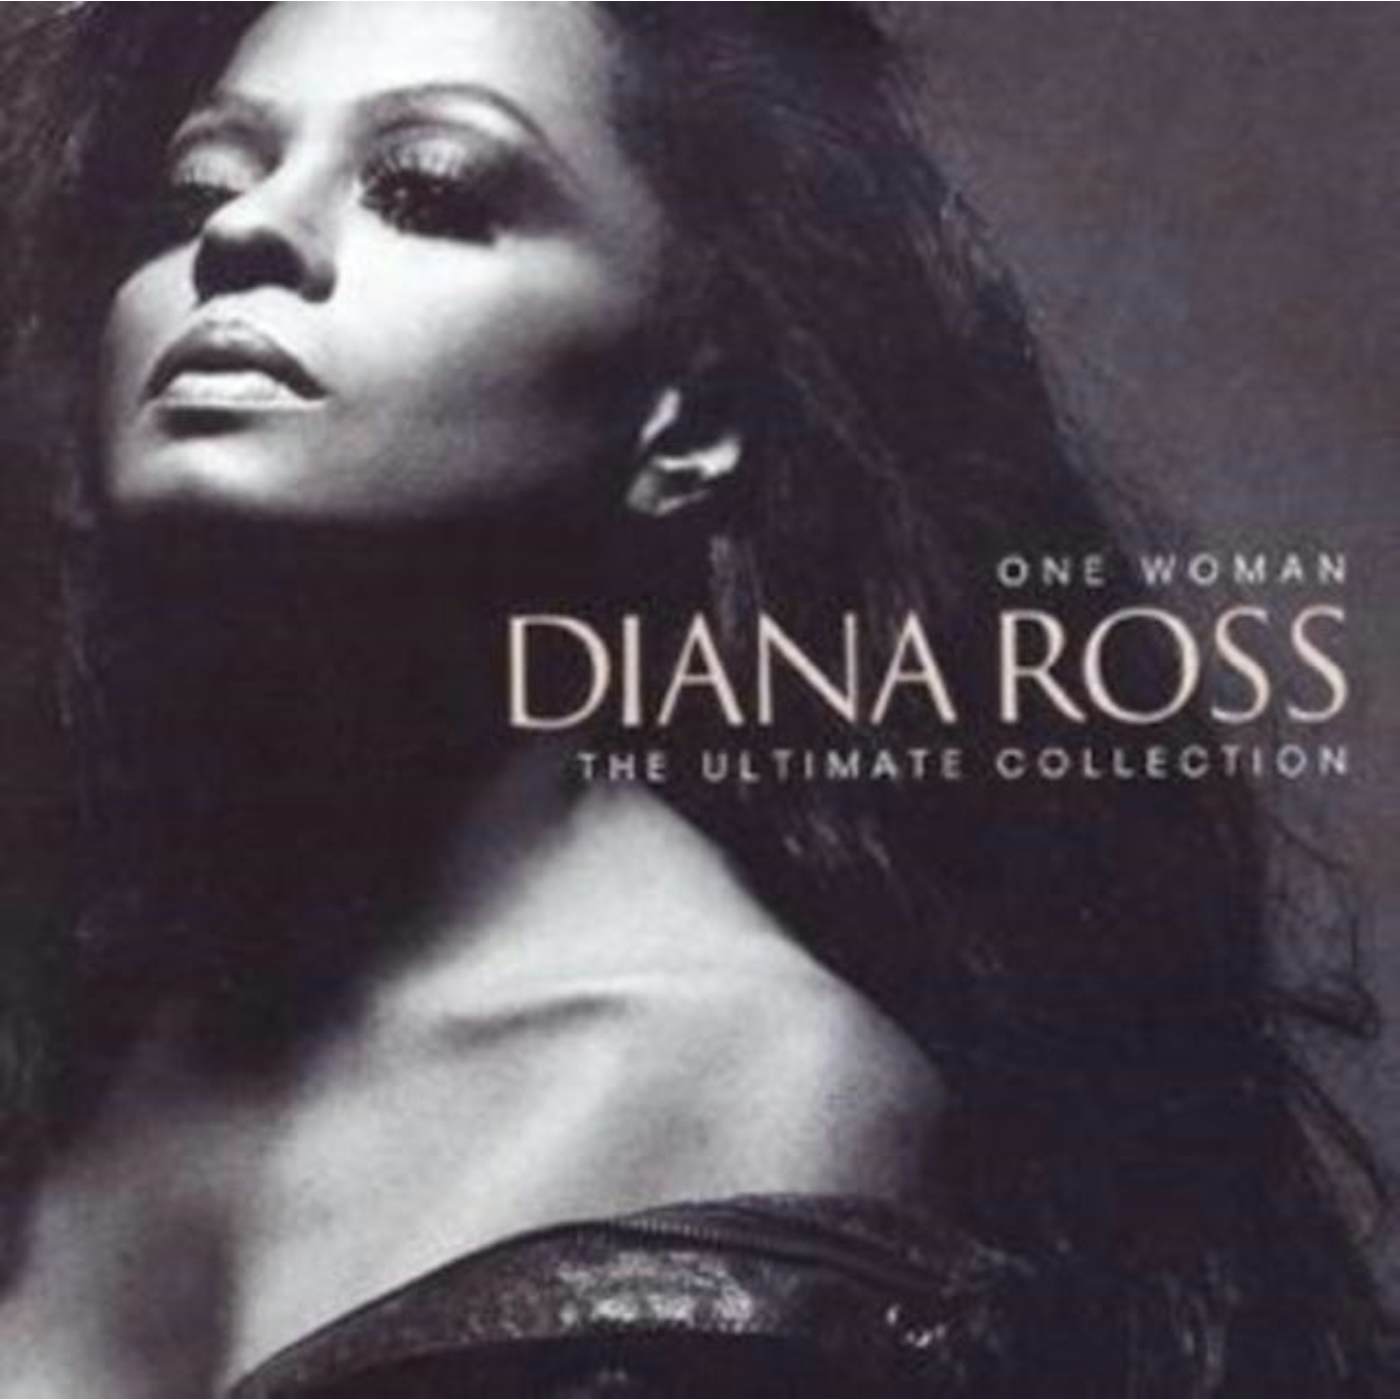 Diana Ross CD - One Woman - The Ultimate Collection